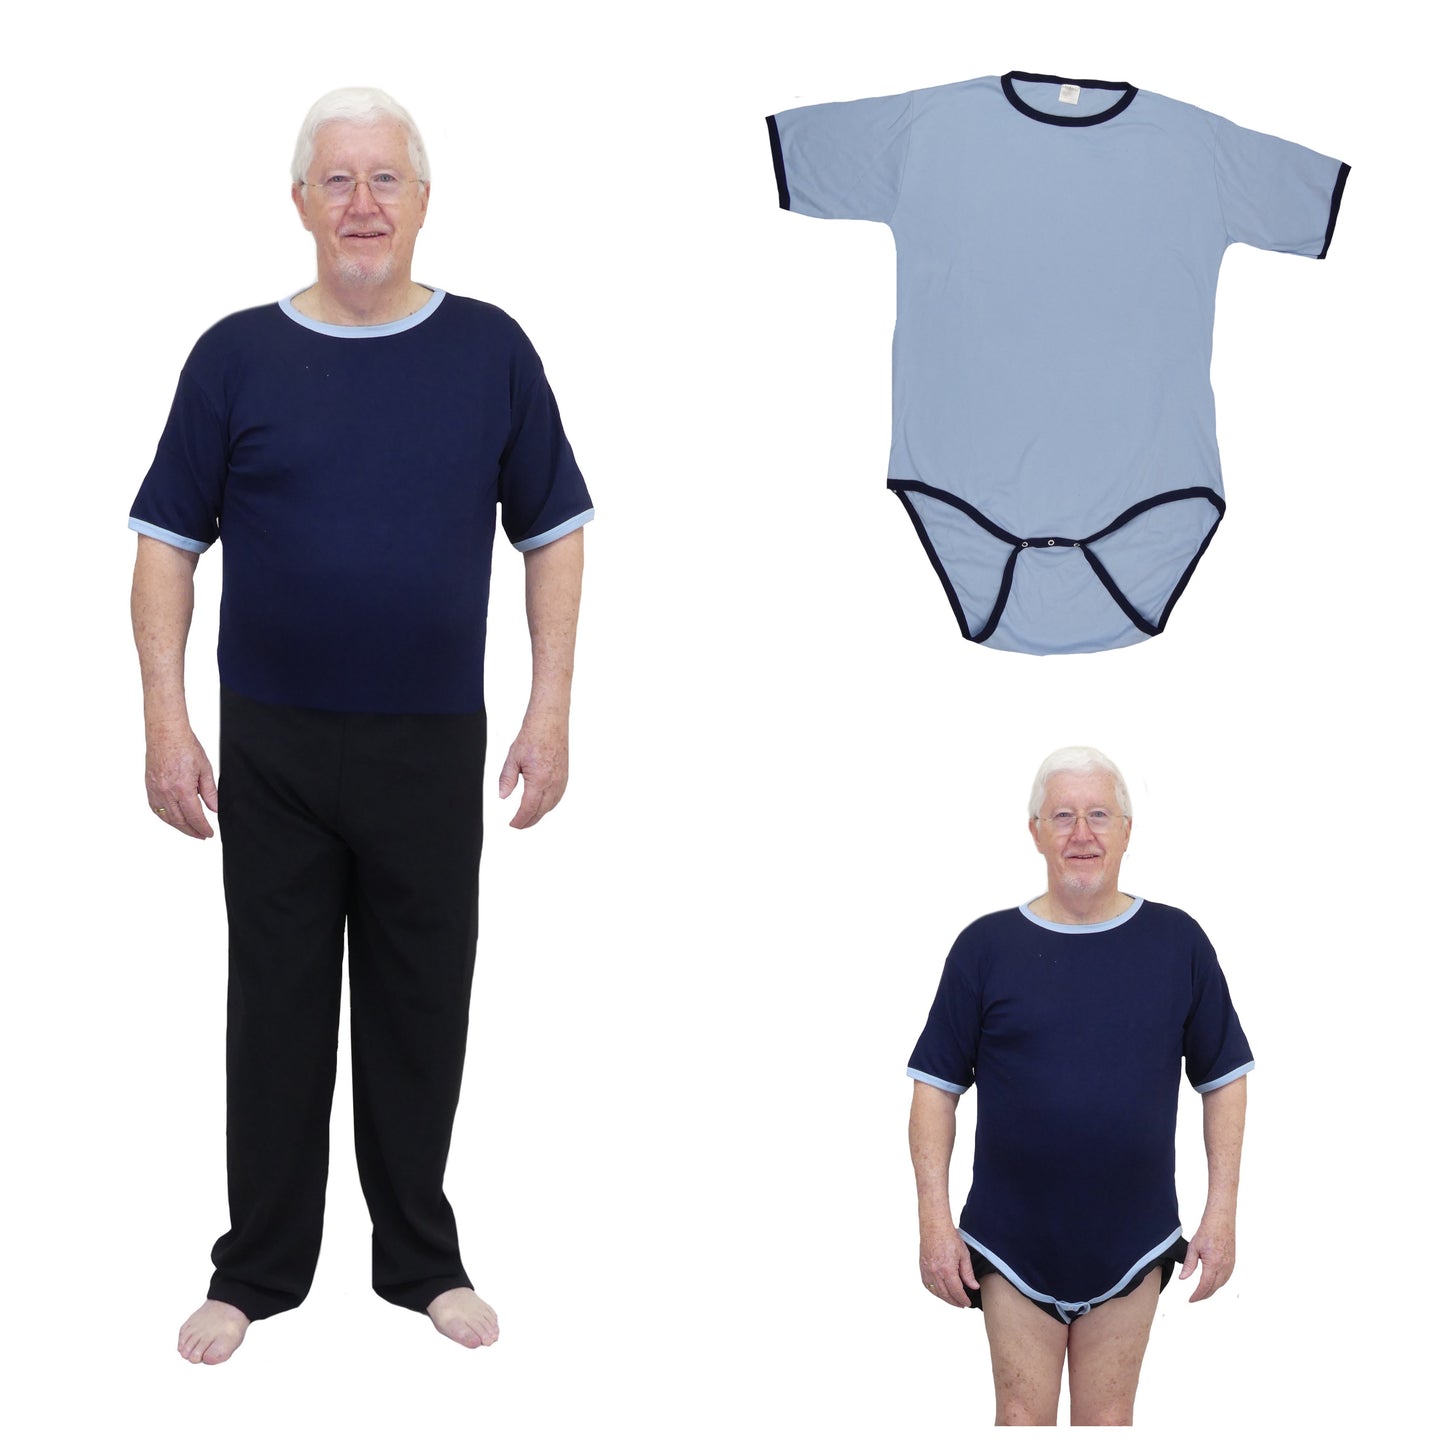 Adult Body Suit/T-Shirt with Poppers - M177